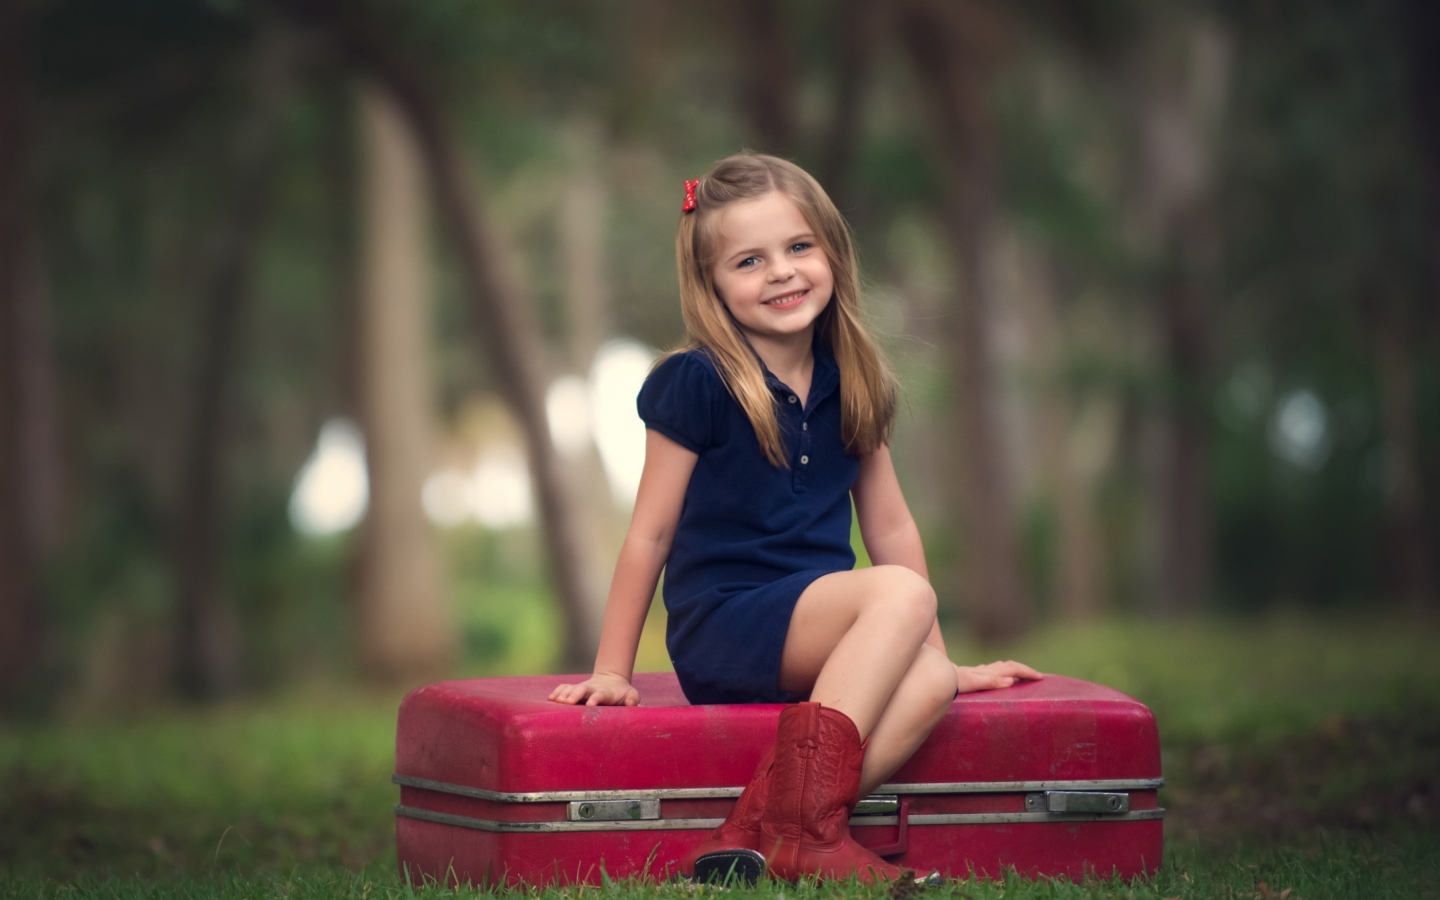 Little Girl Sitting On Red Suitcase screenshot #1 1440x900